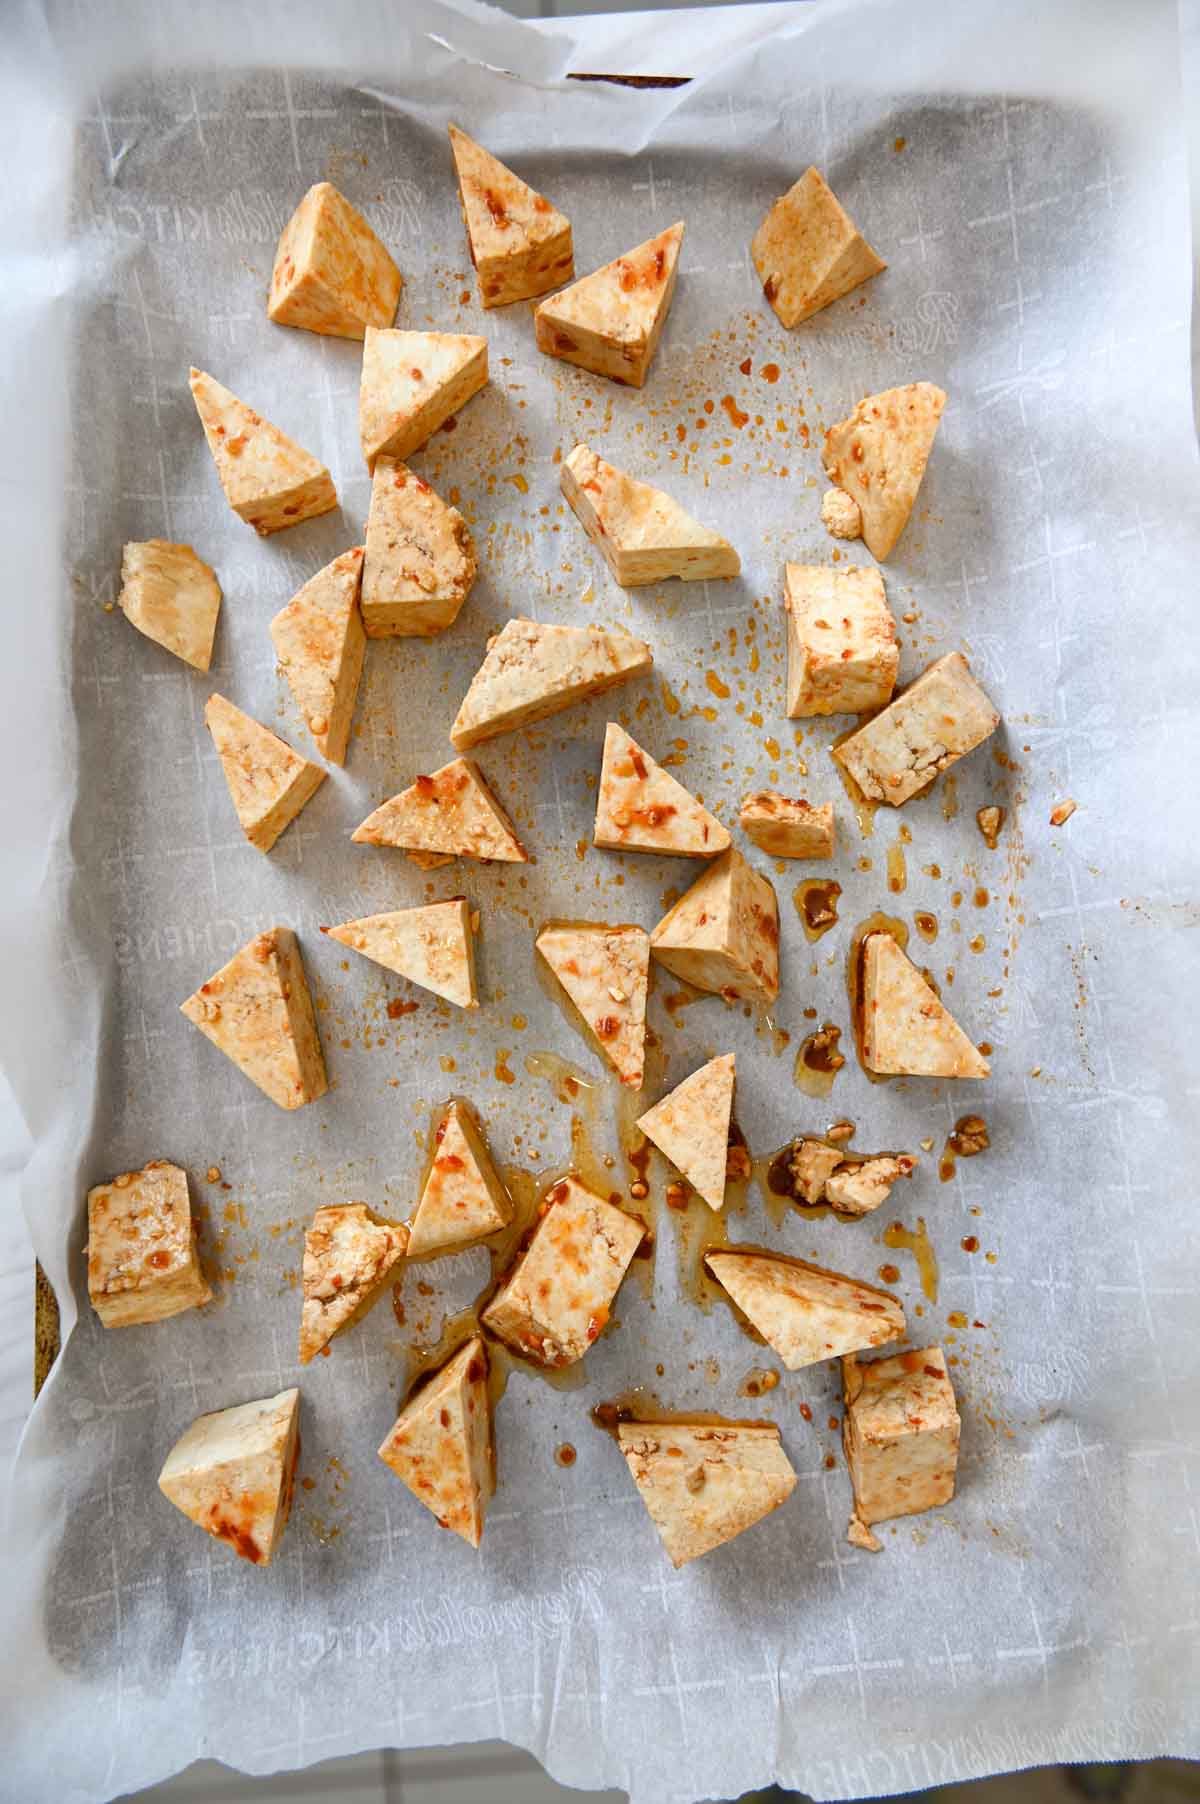 Tofu triangles on parchment paper.